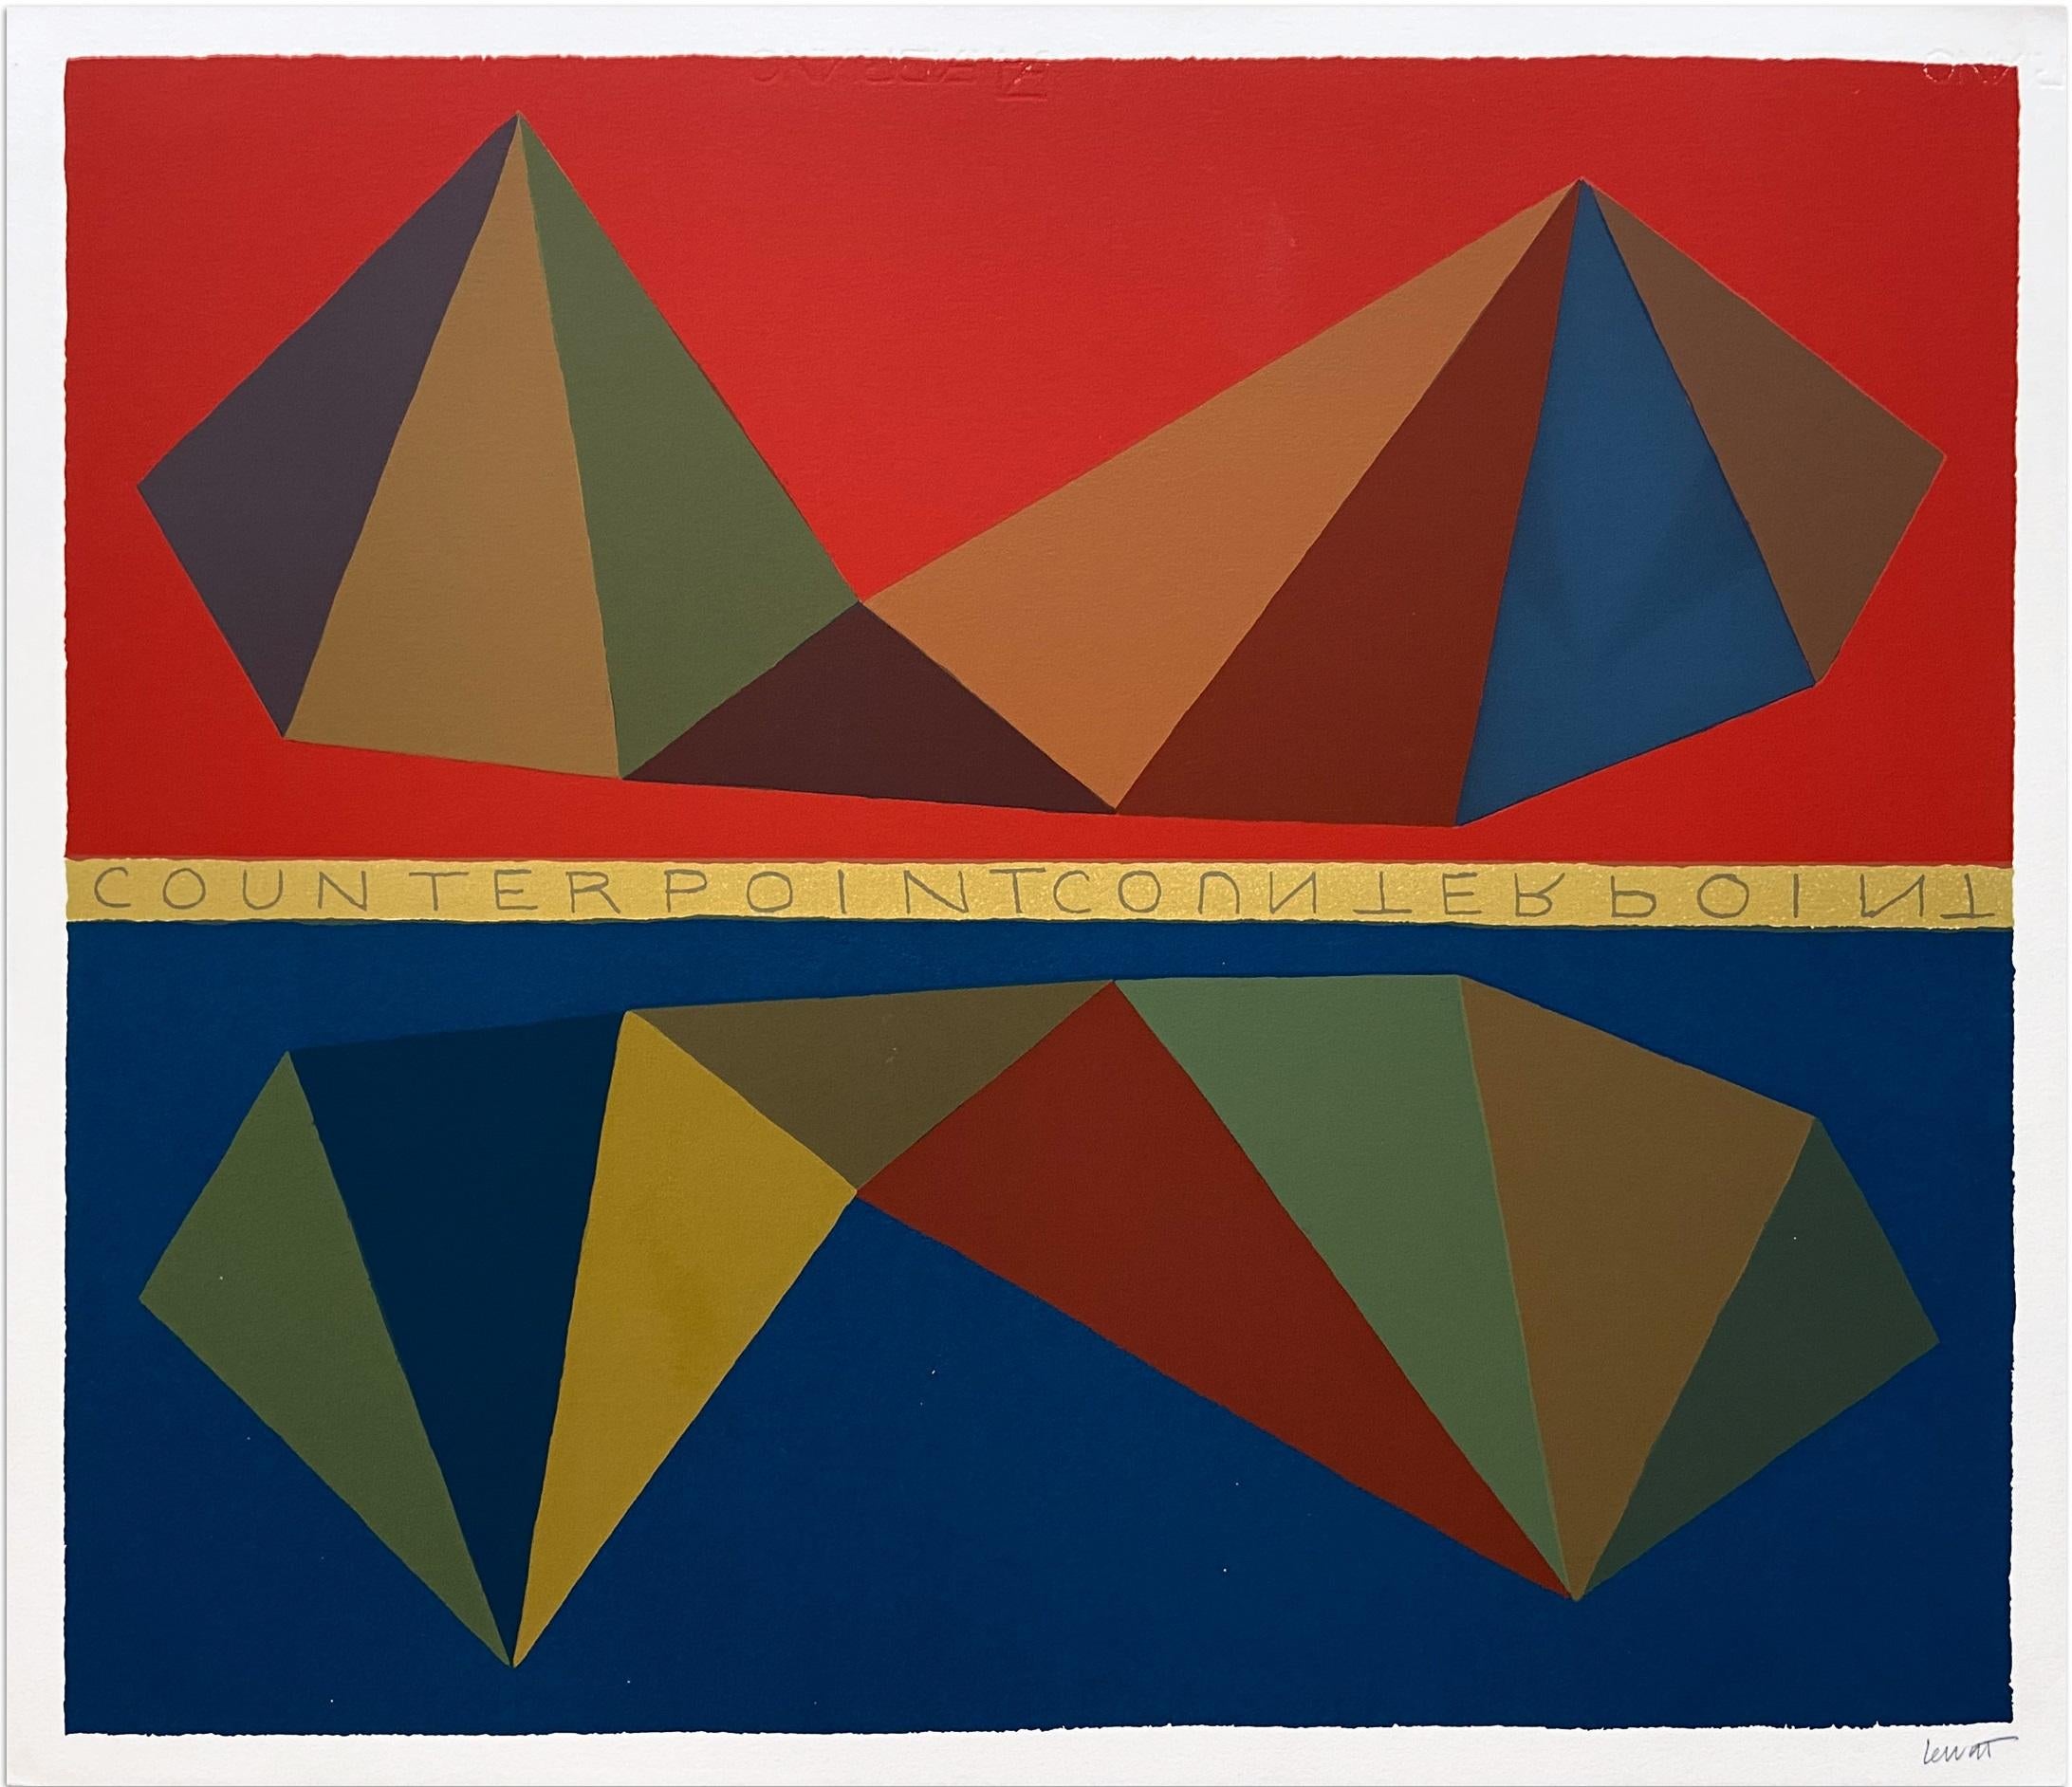 Two Asymmetrical Pyramids and Their Mirror Images (Counterpoint) - Print by Sol LeWitt